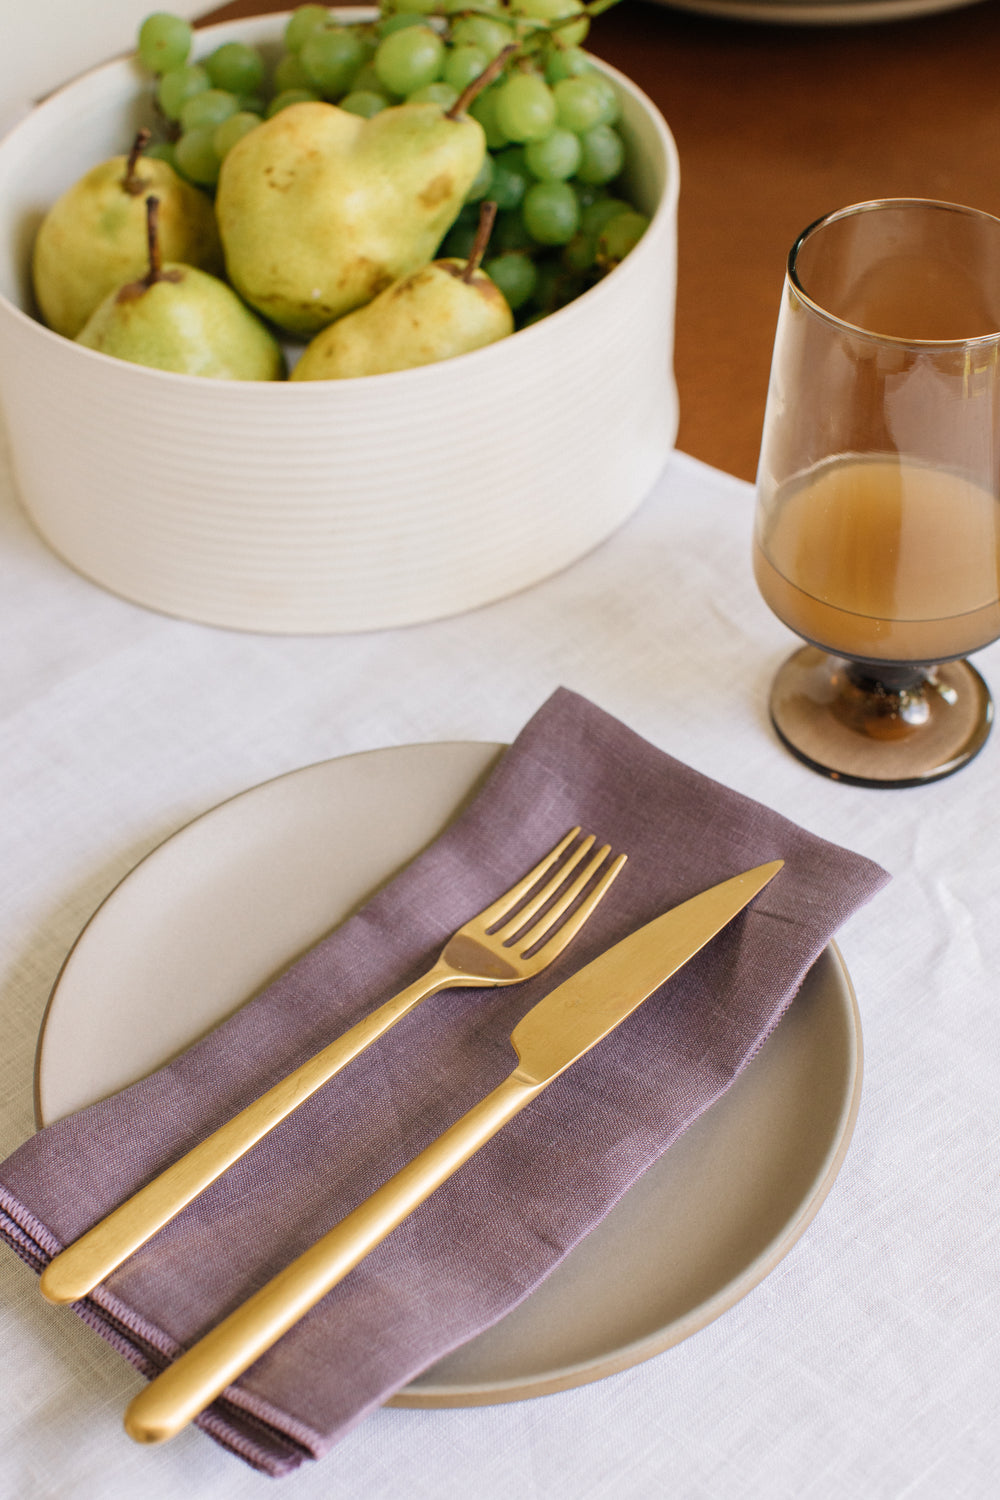 Napkins set of 4 in Eggplant Linen - Whimsy & Row